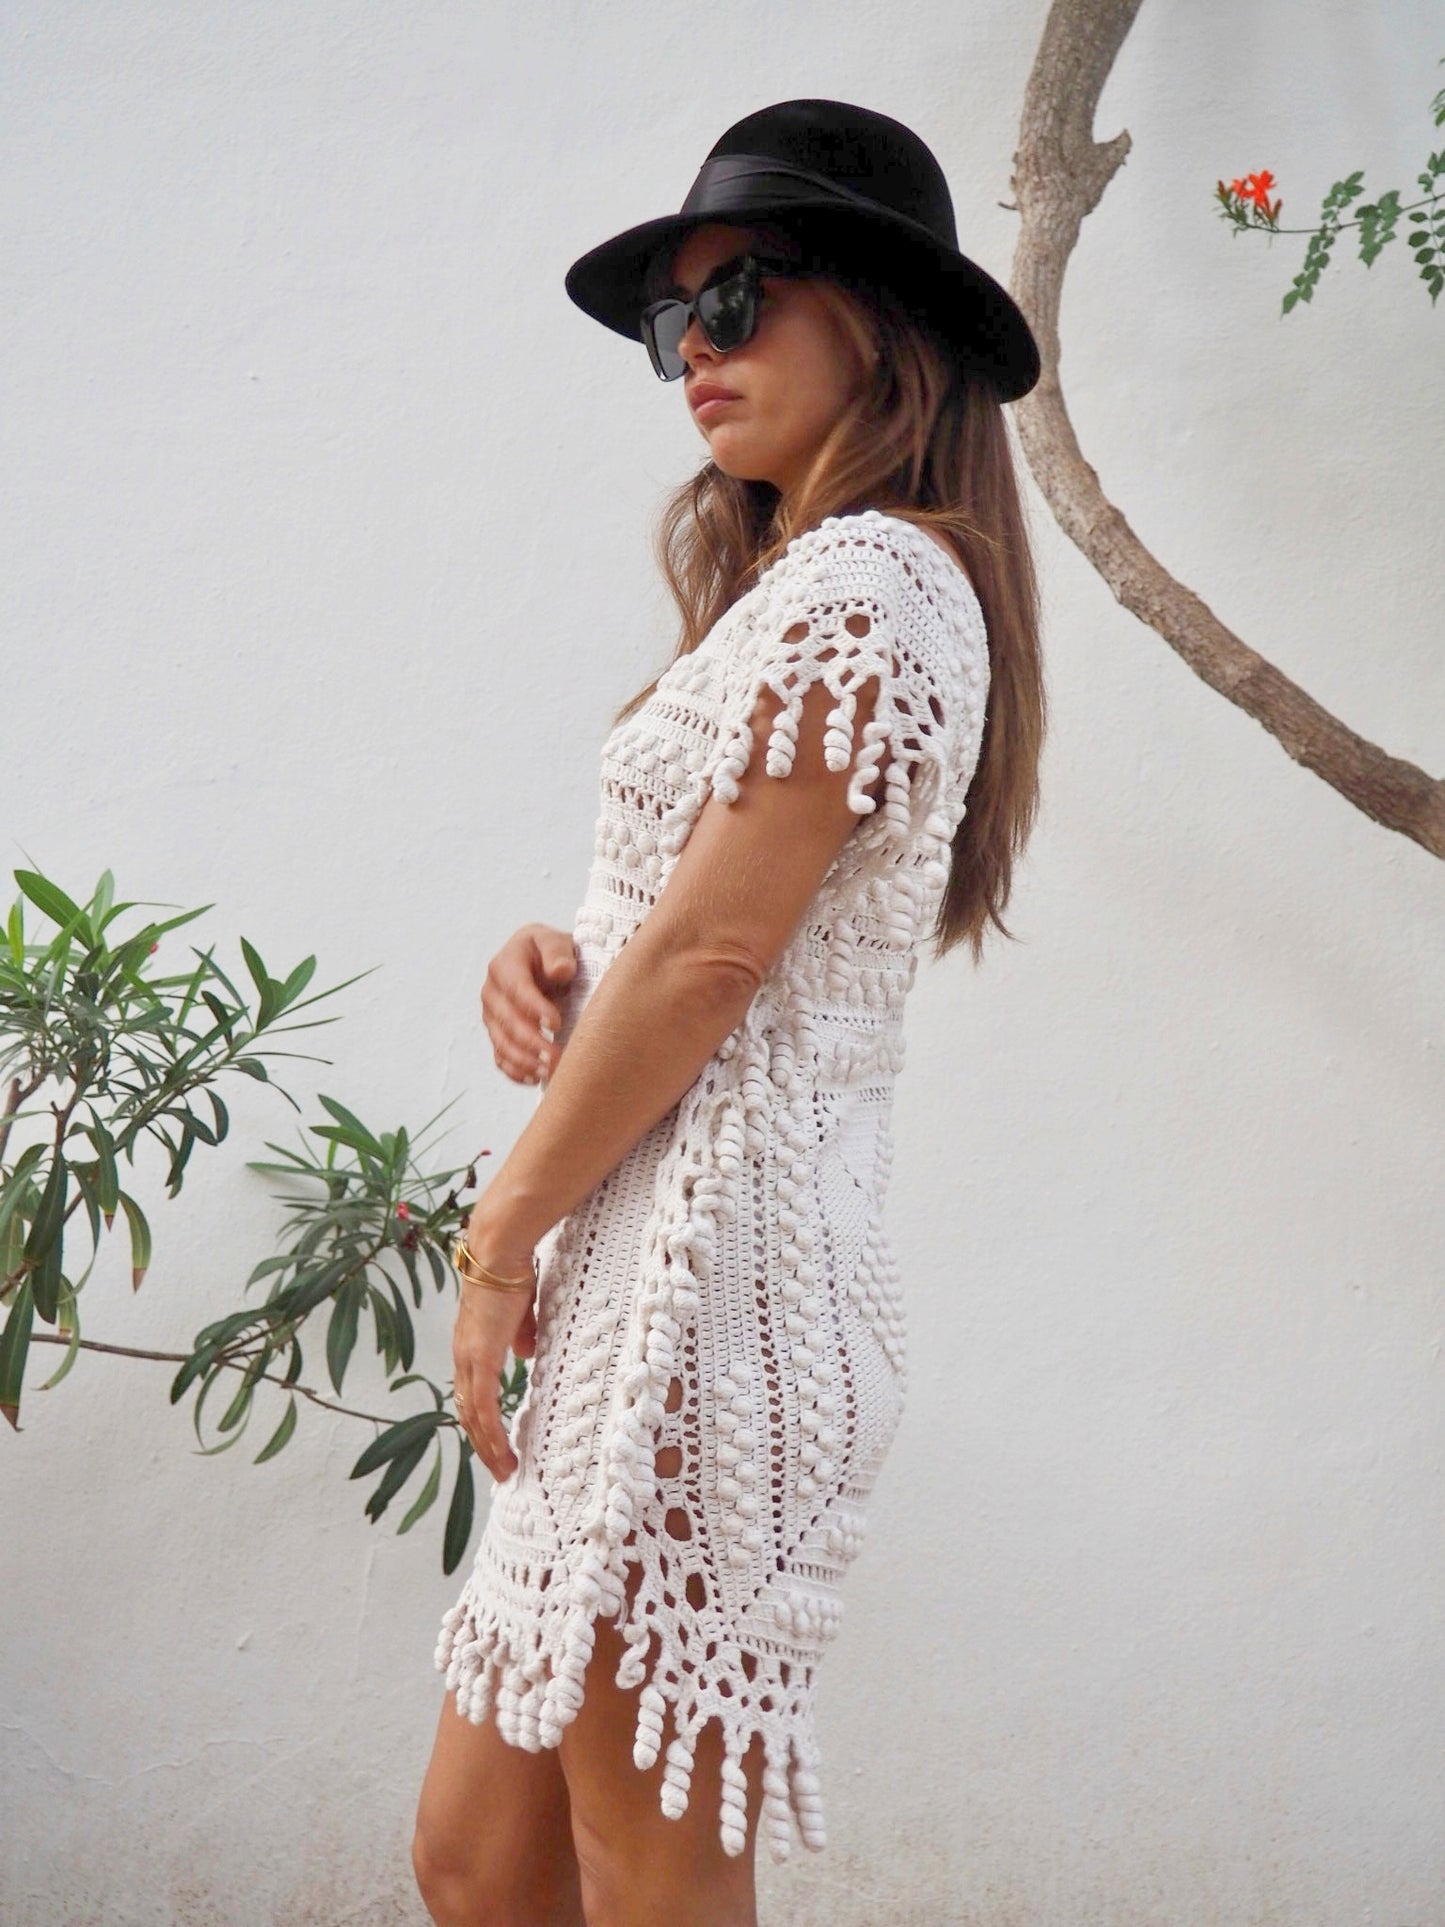 Vintage white 1960’s handmade detailed crochet lace dress up-cycled by Vagabond Ibiza.